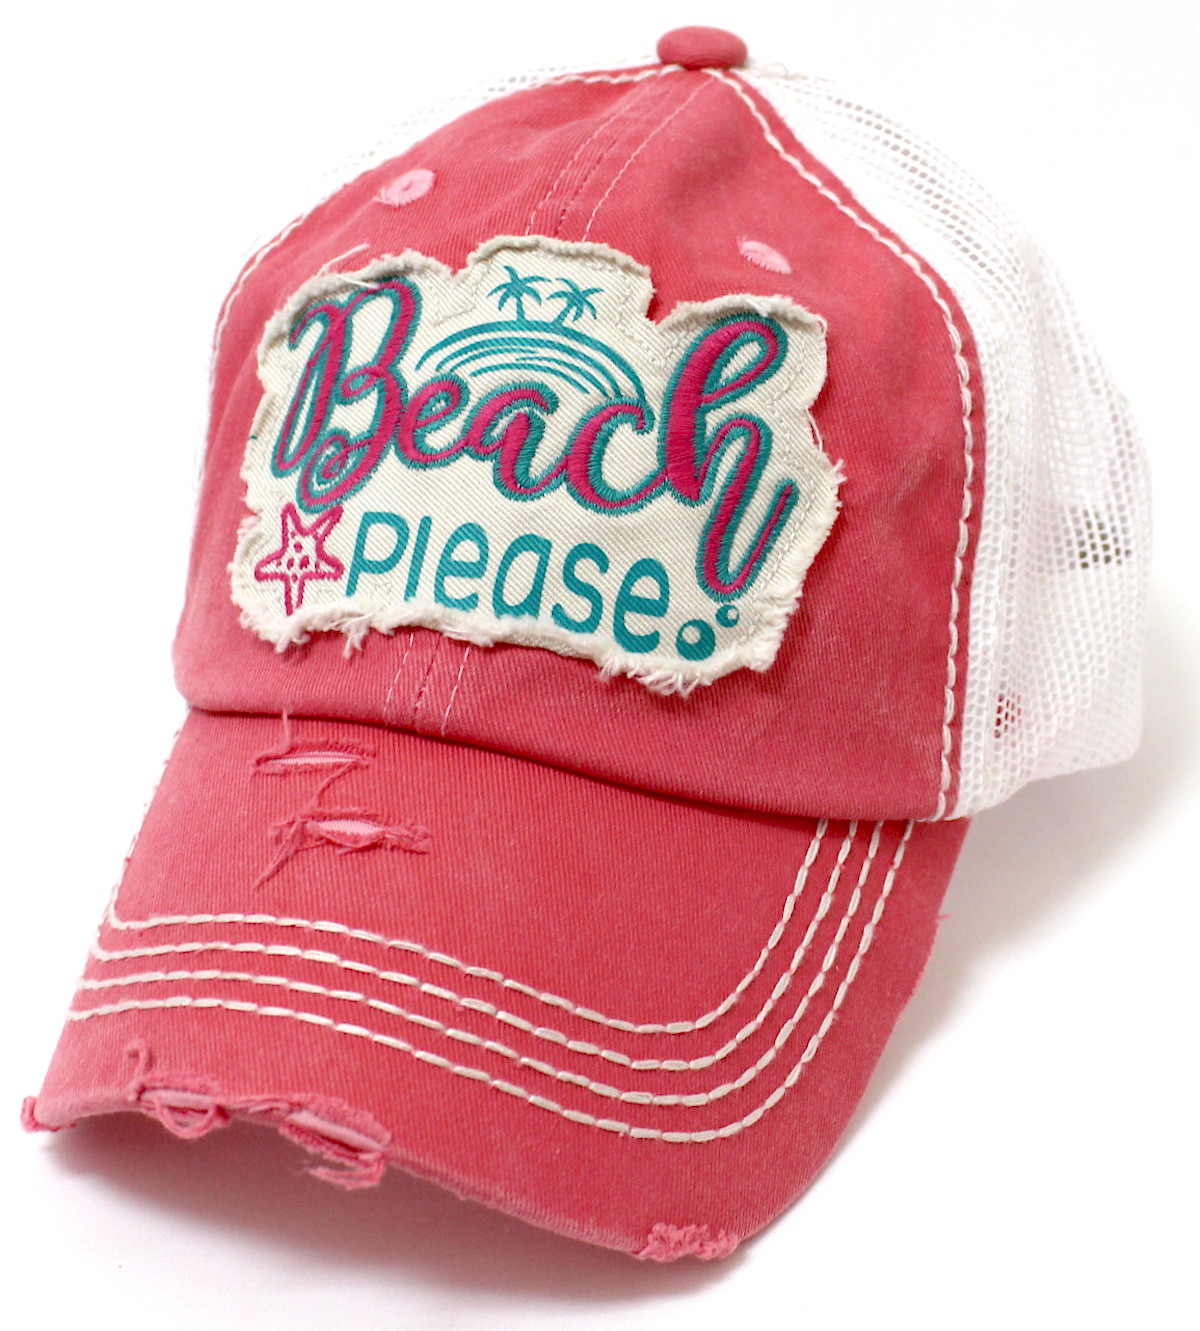 BeachPlease_Pin_Front